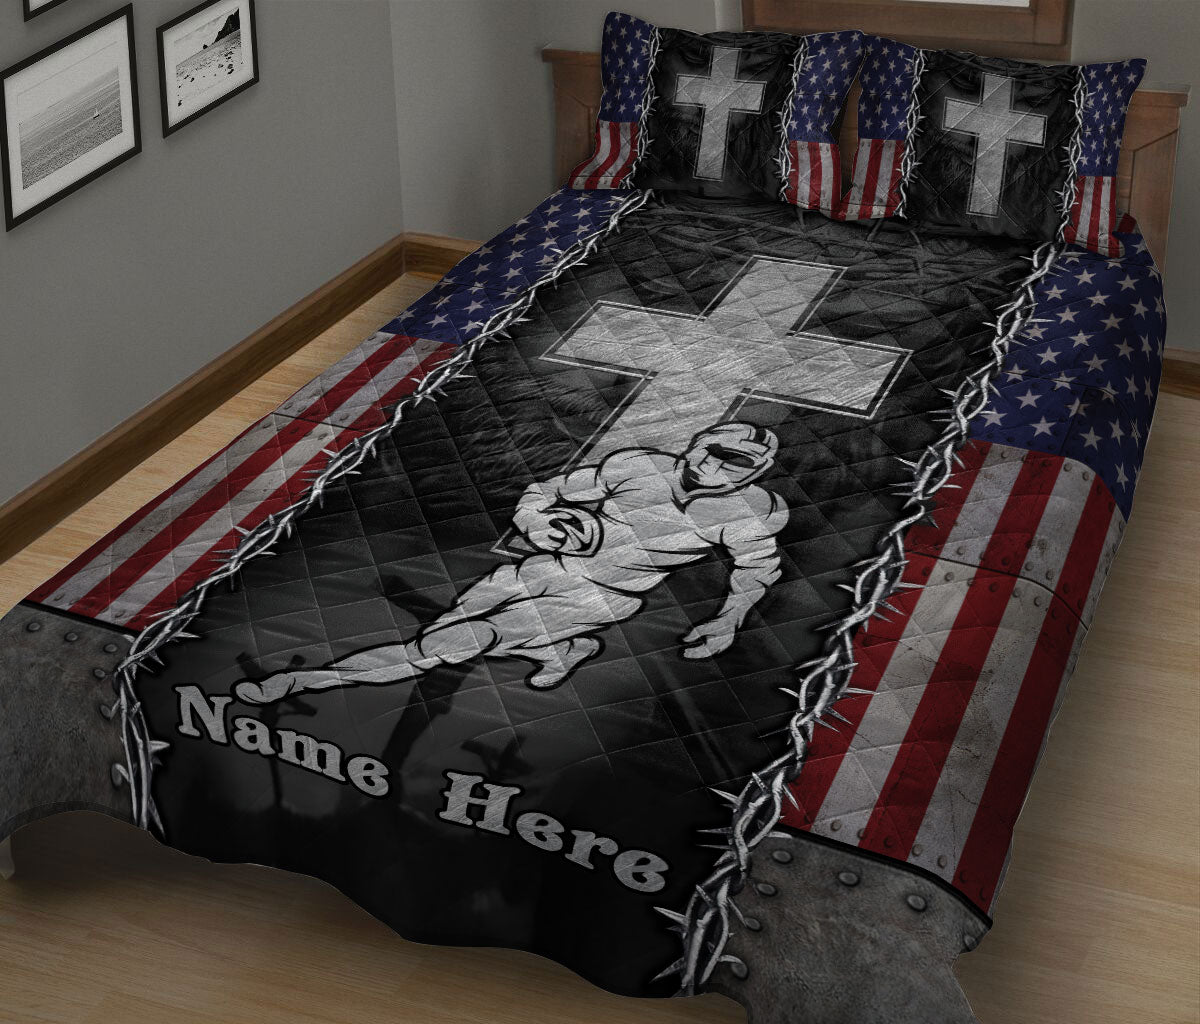 Ohaprints-Quilt-Bed-Set-Pillowcase-Football-God-Jesus-Cross-American-Us-Flag-Christian-Custom-Personalized-Name-Blanket-Bedspread-Bedding-946-King (90'' x 100'')